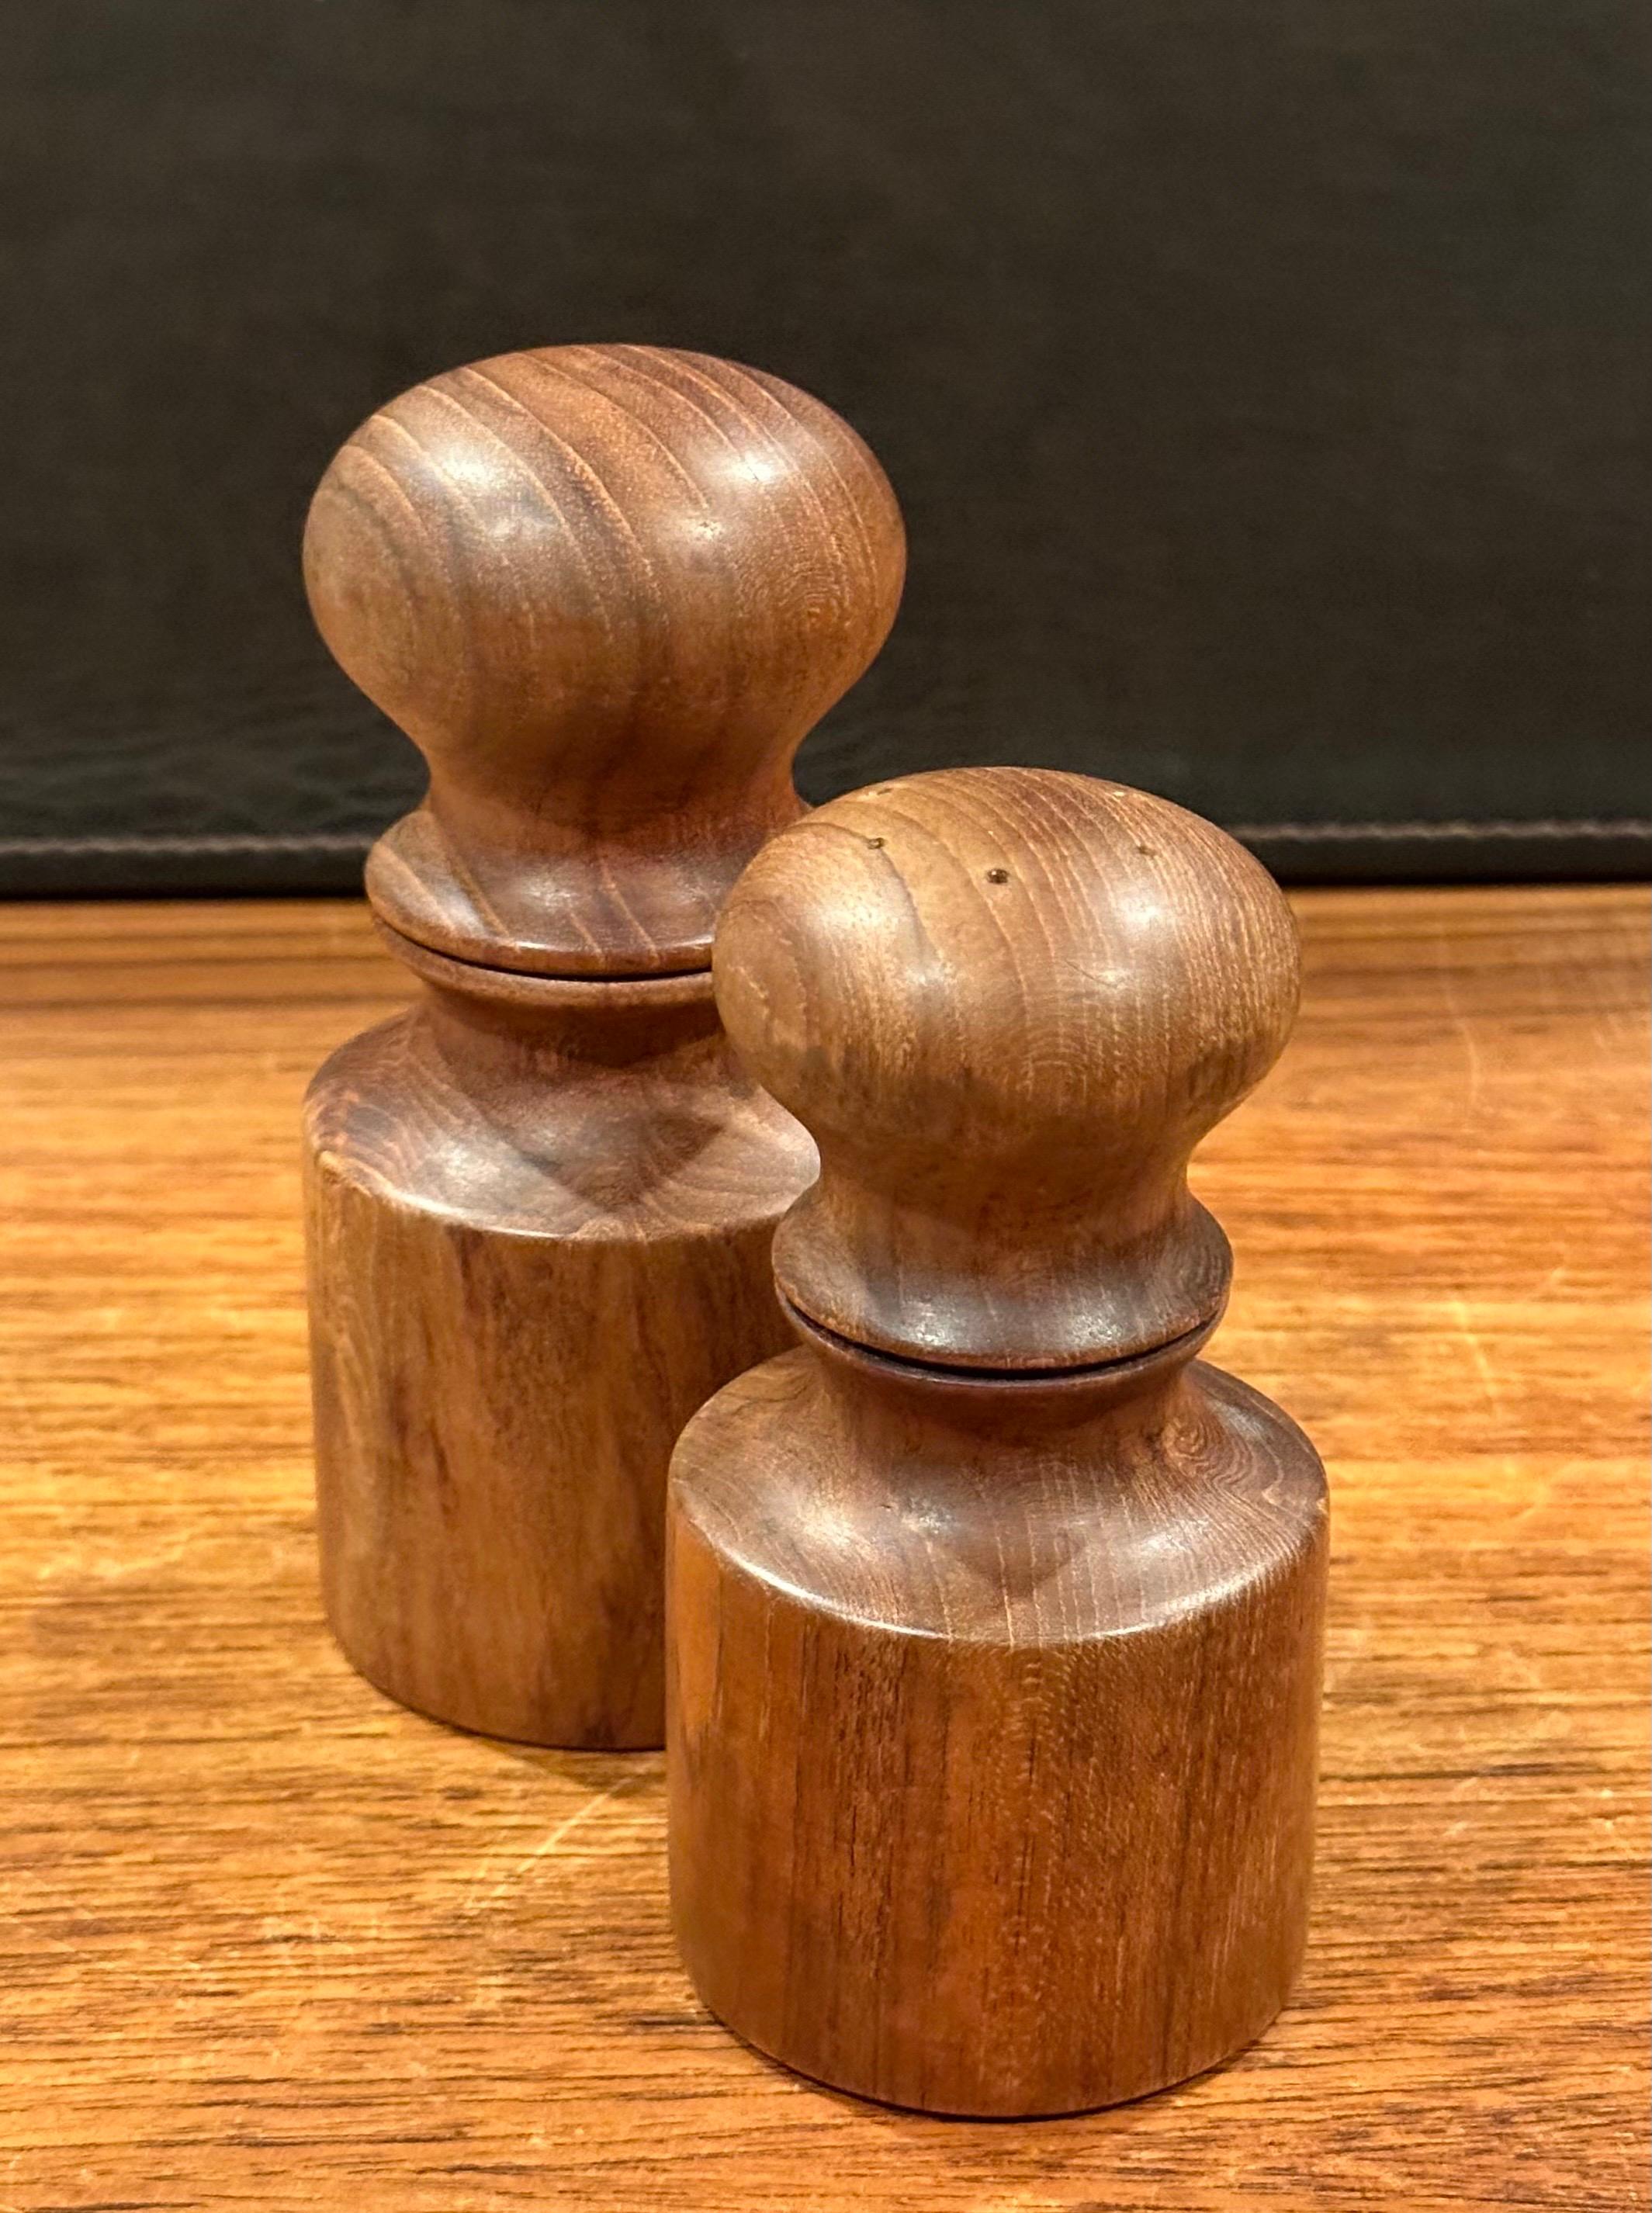 Pair of MCM Teak Salt and Pepper Shakers by Jens Quistgaard for Dansk In Good Condition For Sale In San Diego, CA